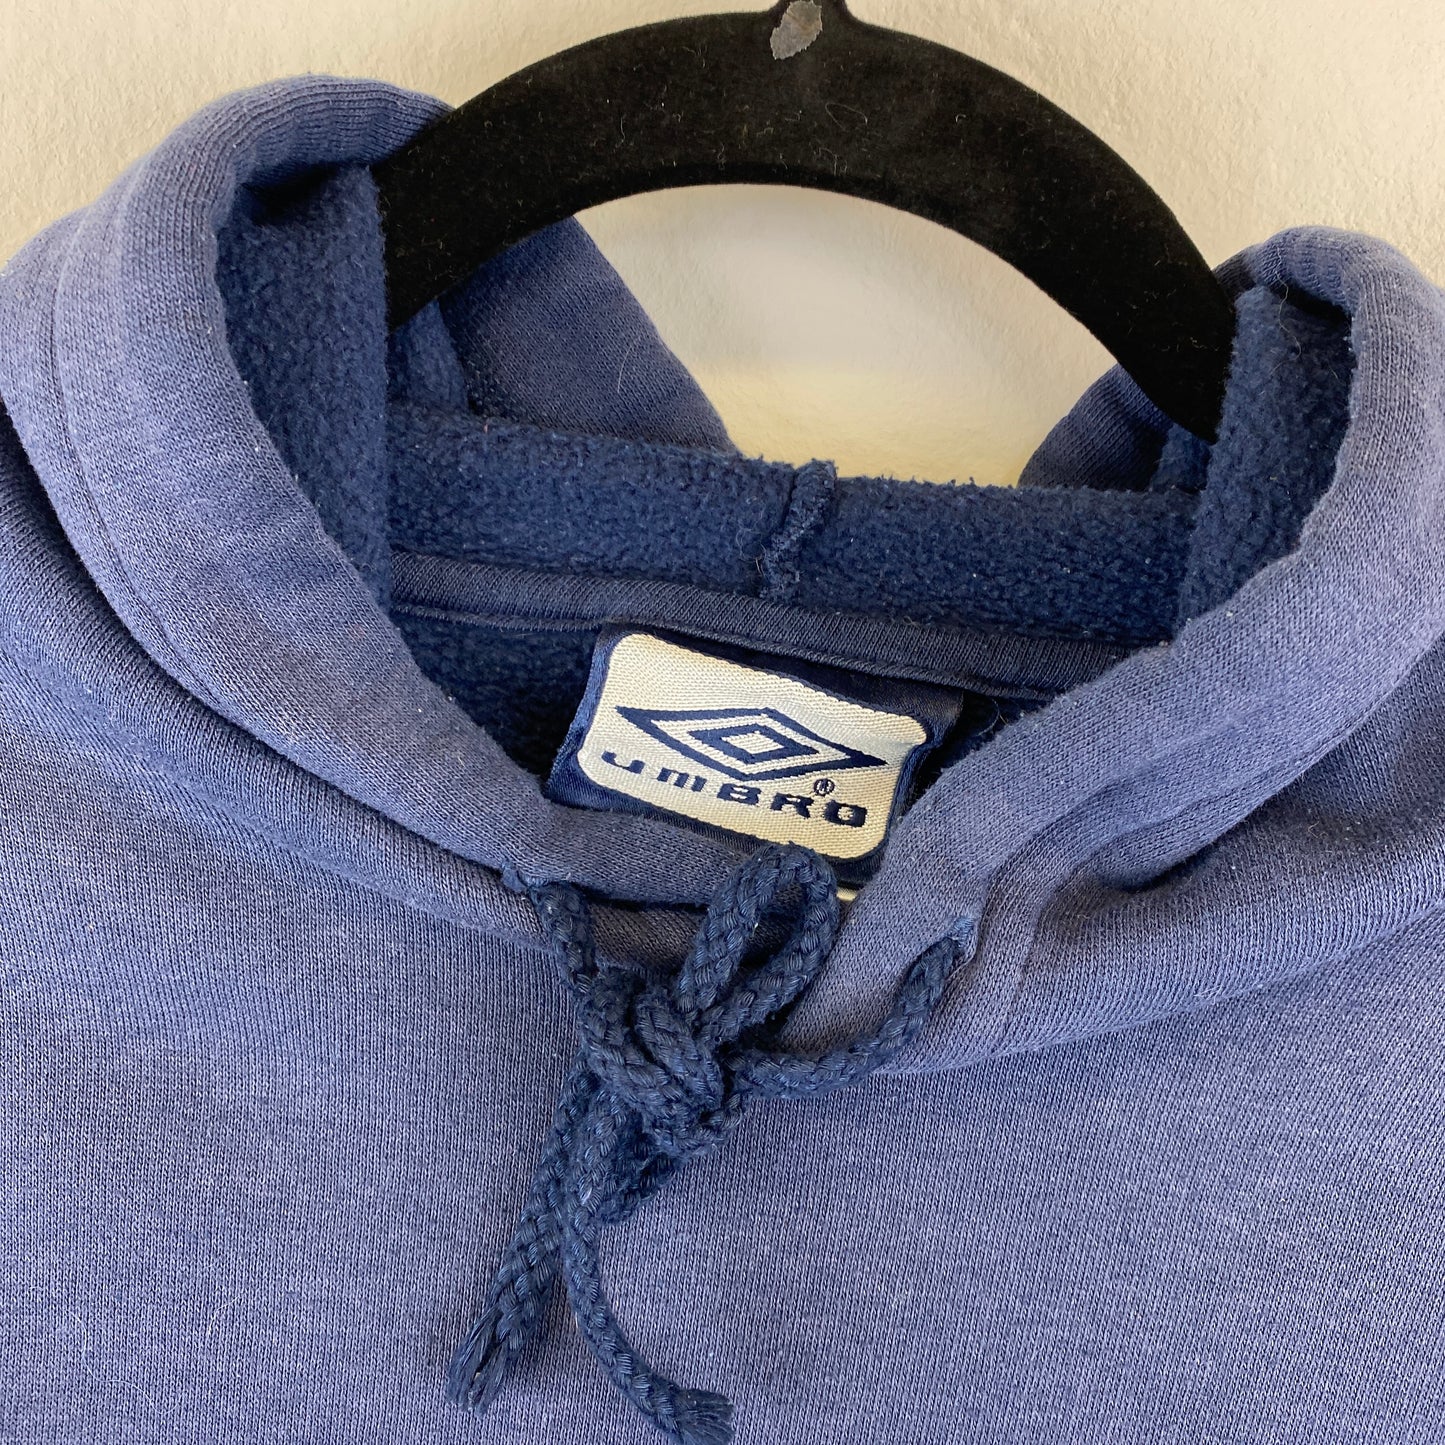 Umbro embroidered hoodie (M-L)